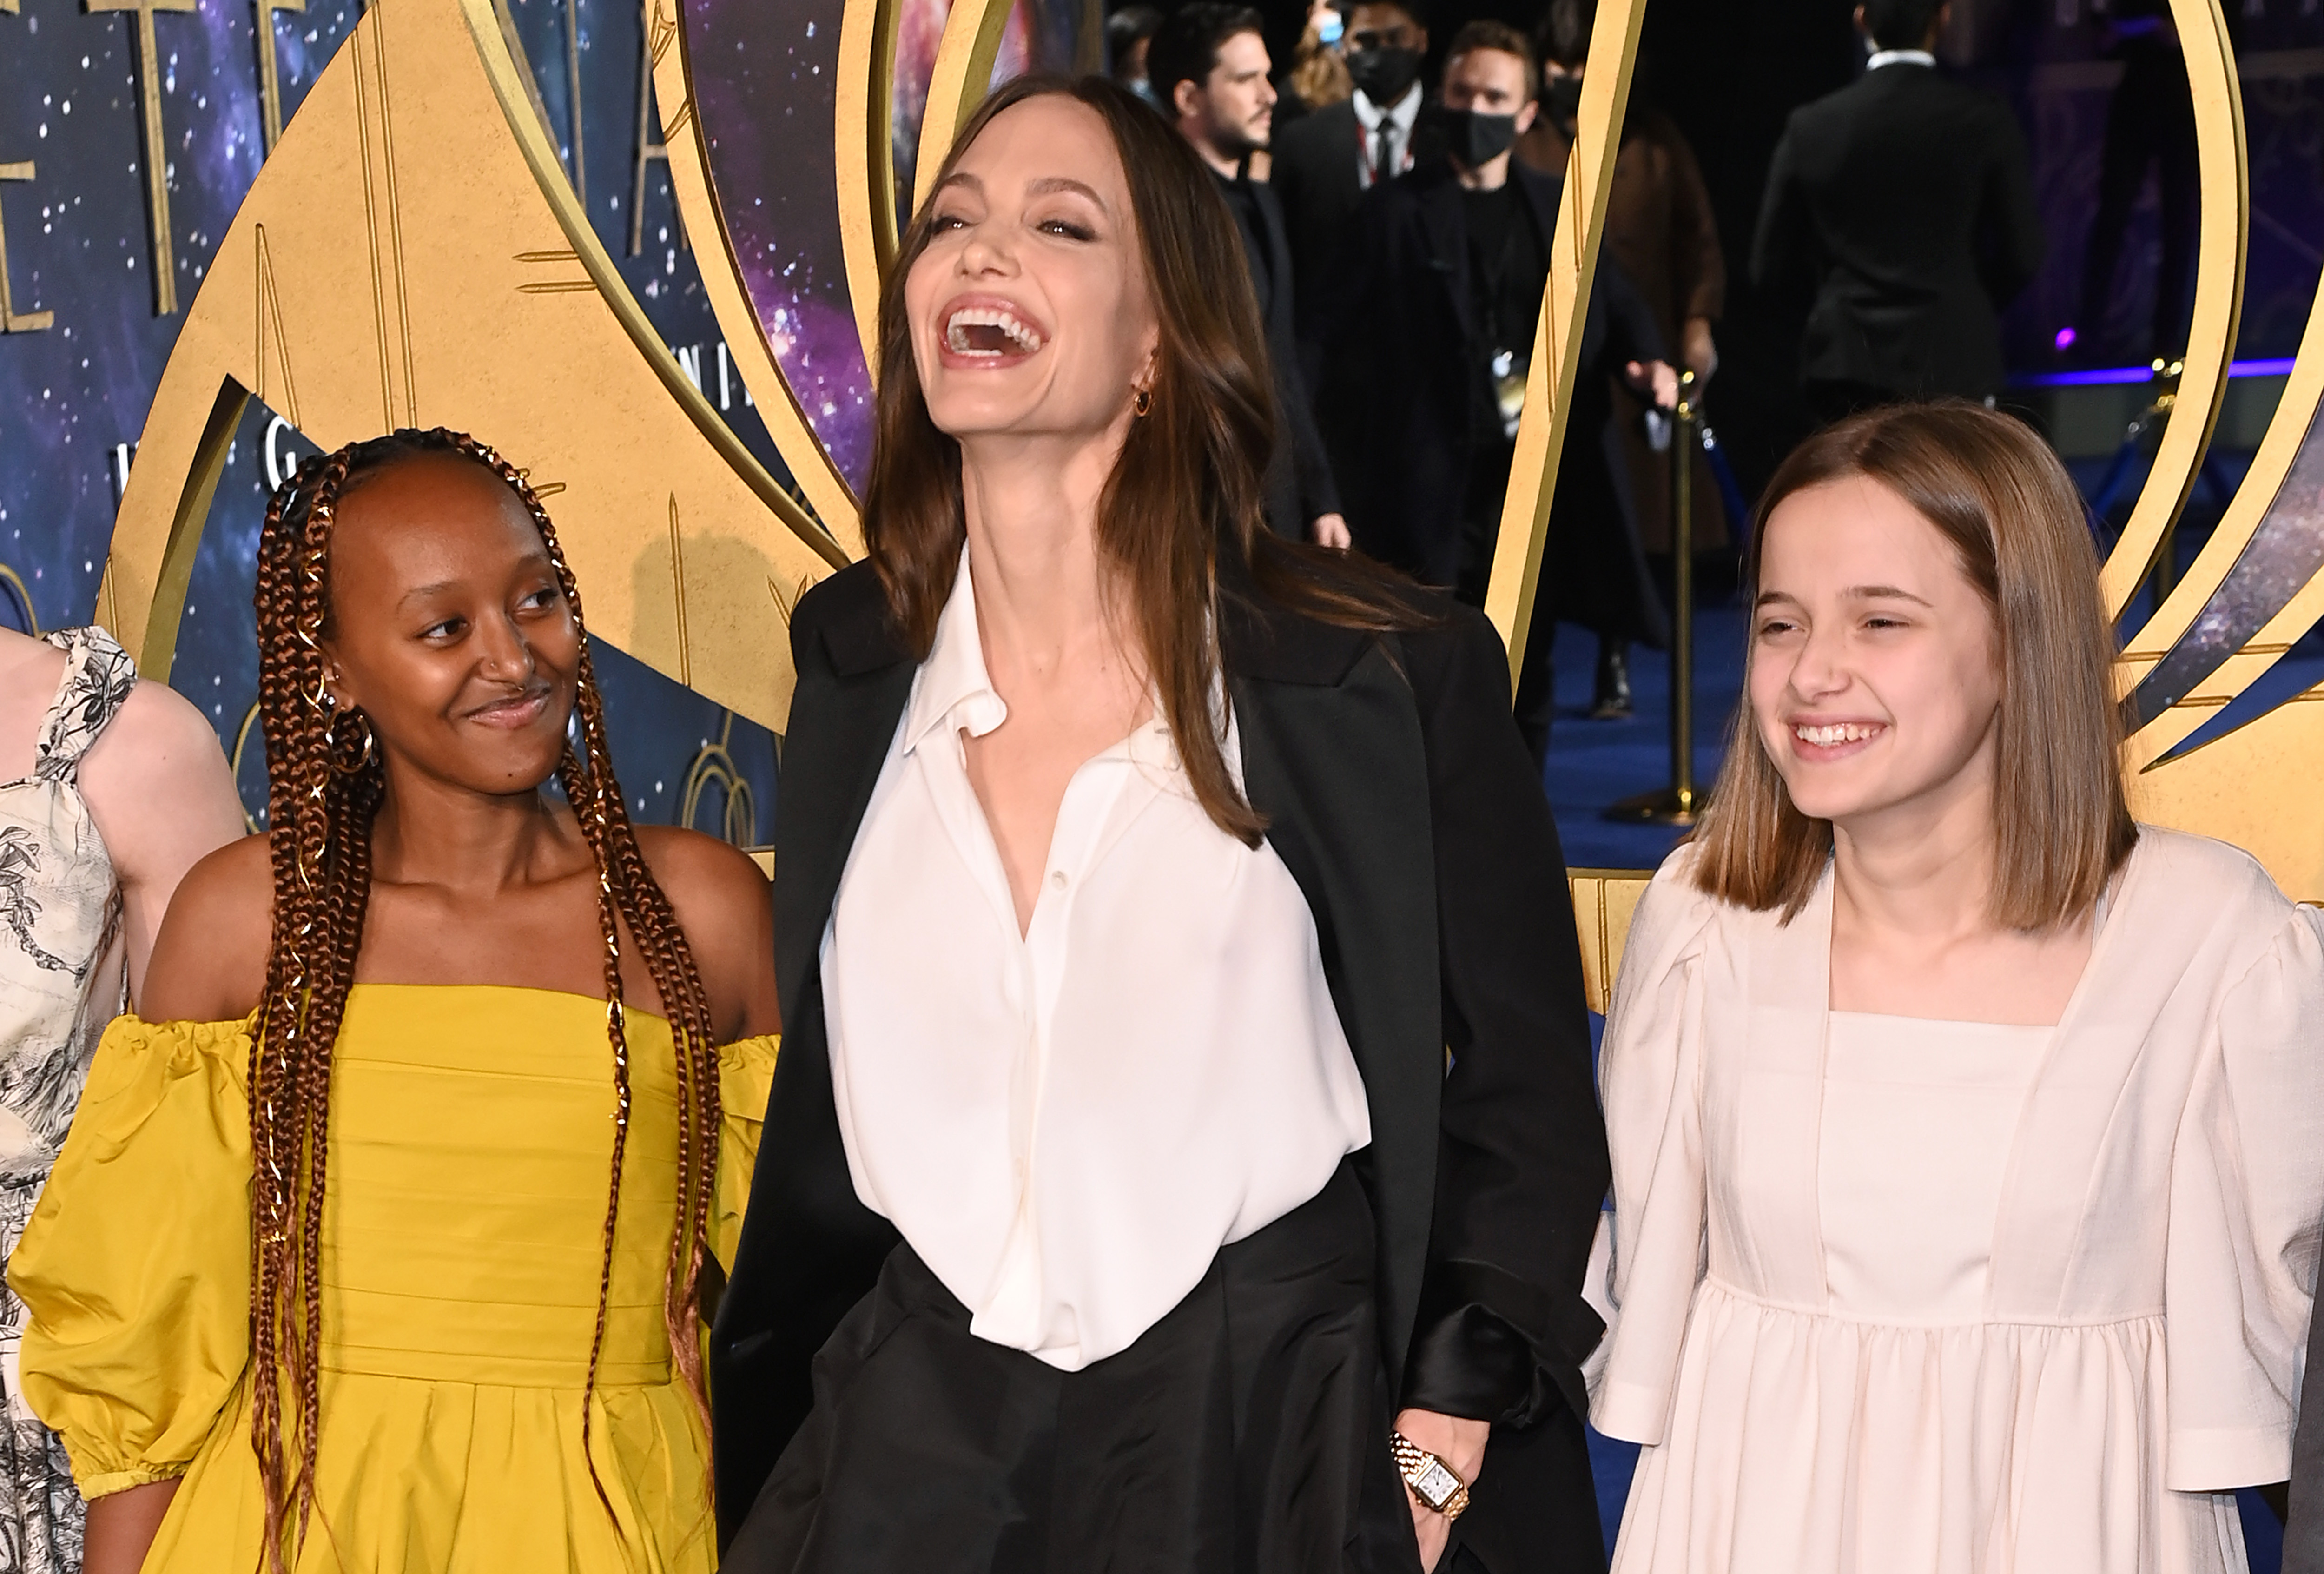 Fans shocked that Brad Pitt and Angelina Jolie's daughter Vivienne looks like grandpa | Woman & Home